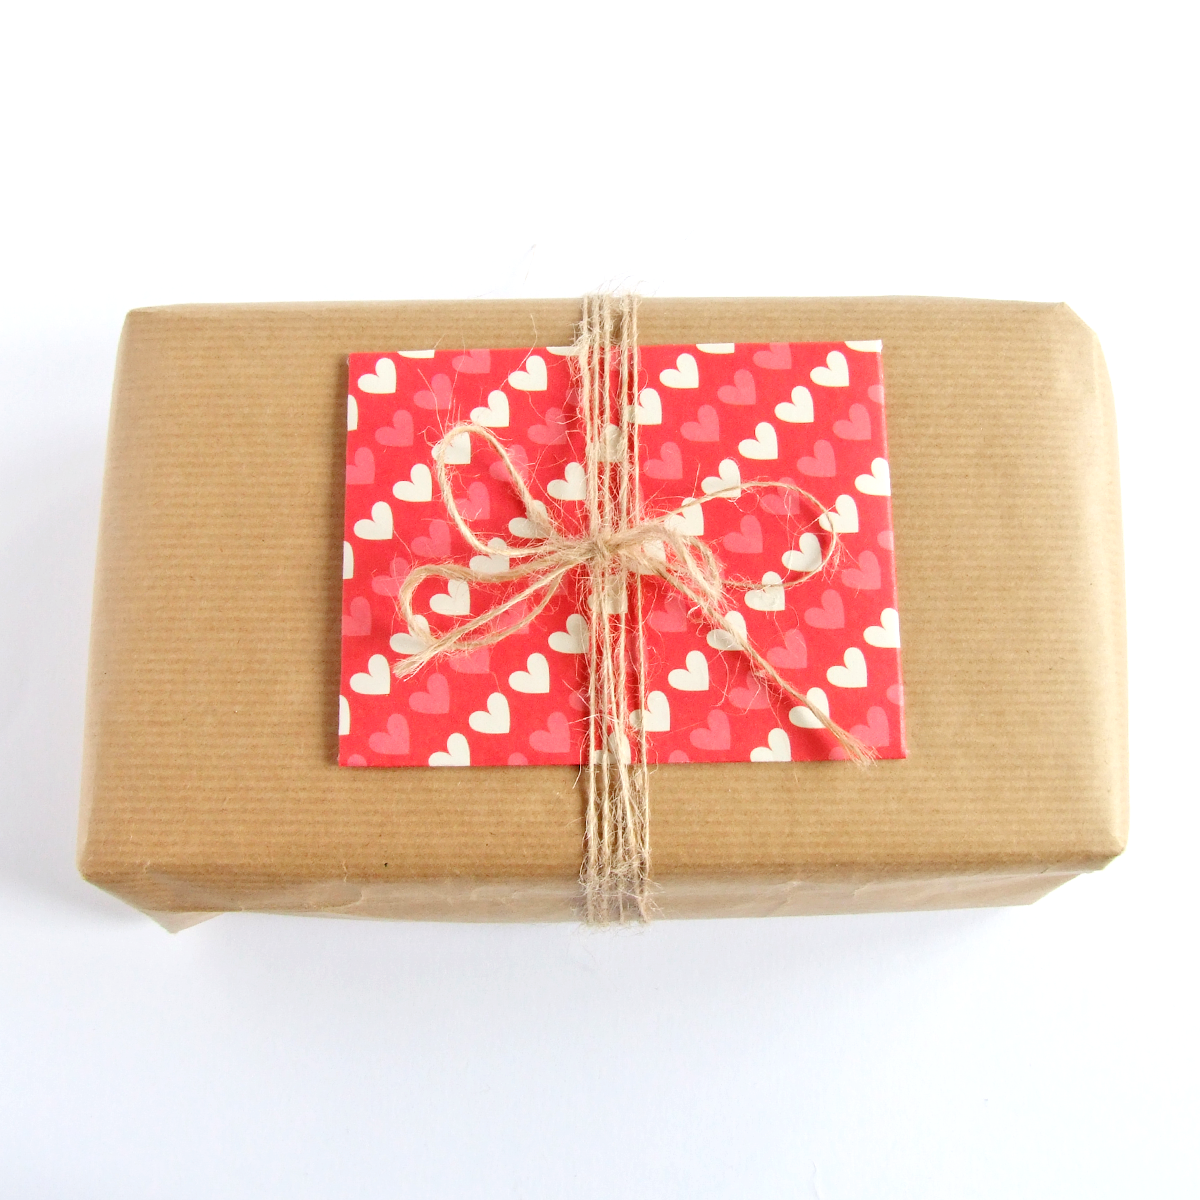 heart patterned gift message envelope by Bonschelle